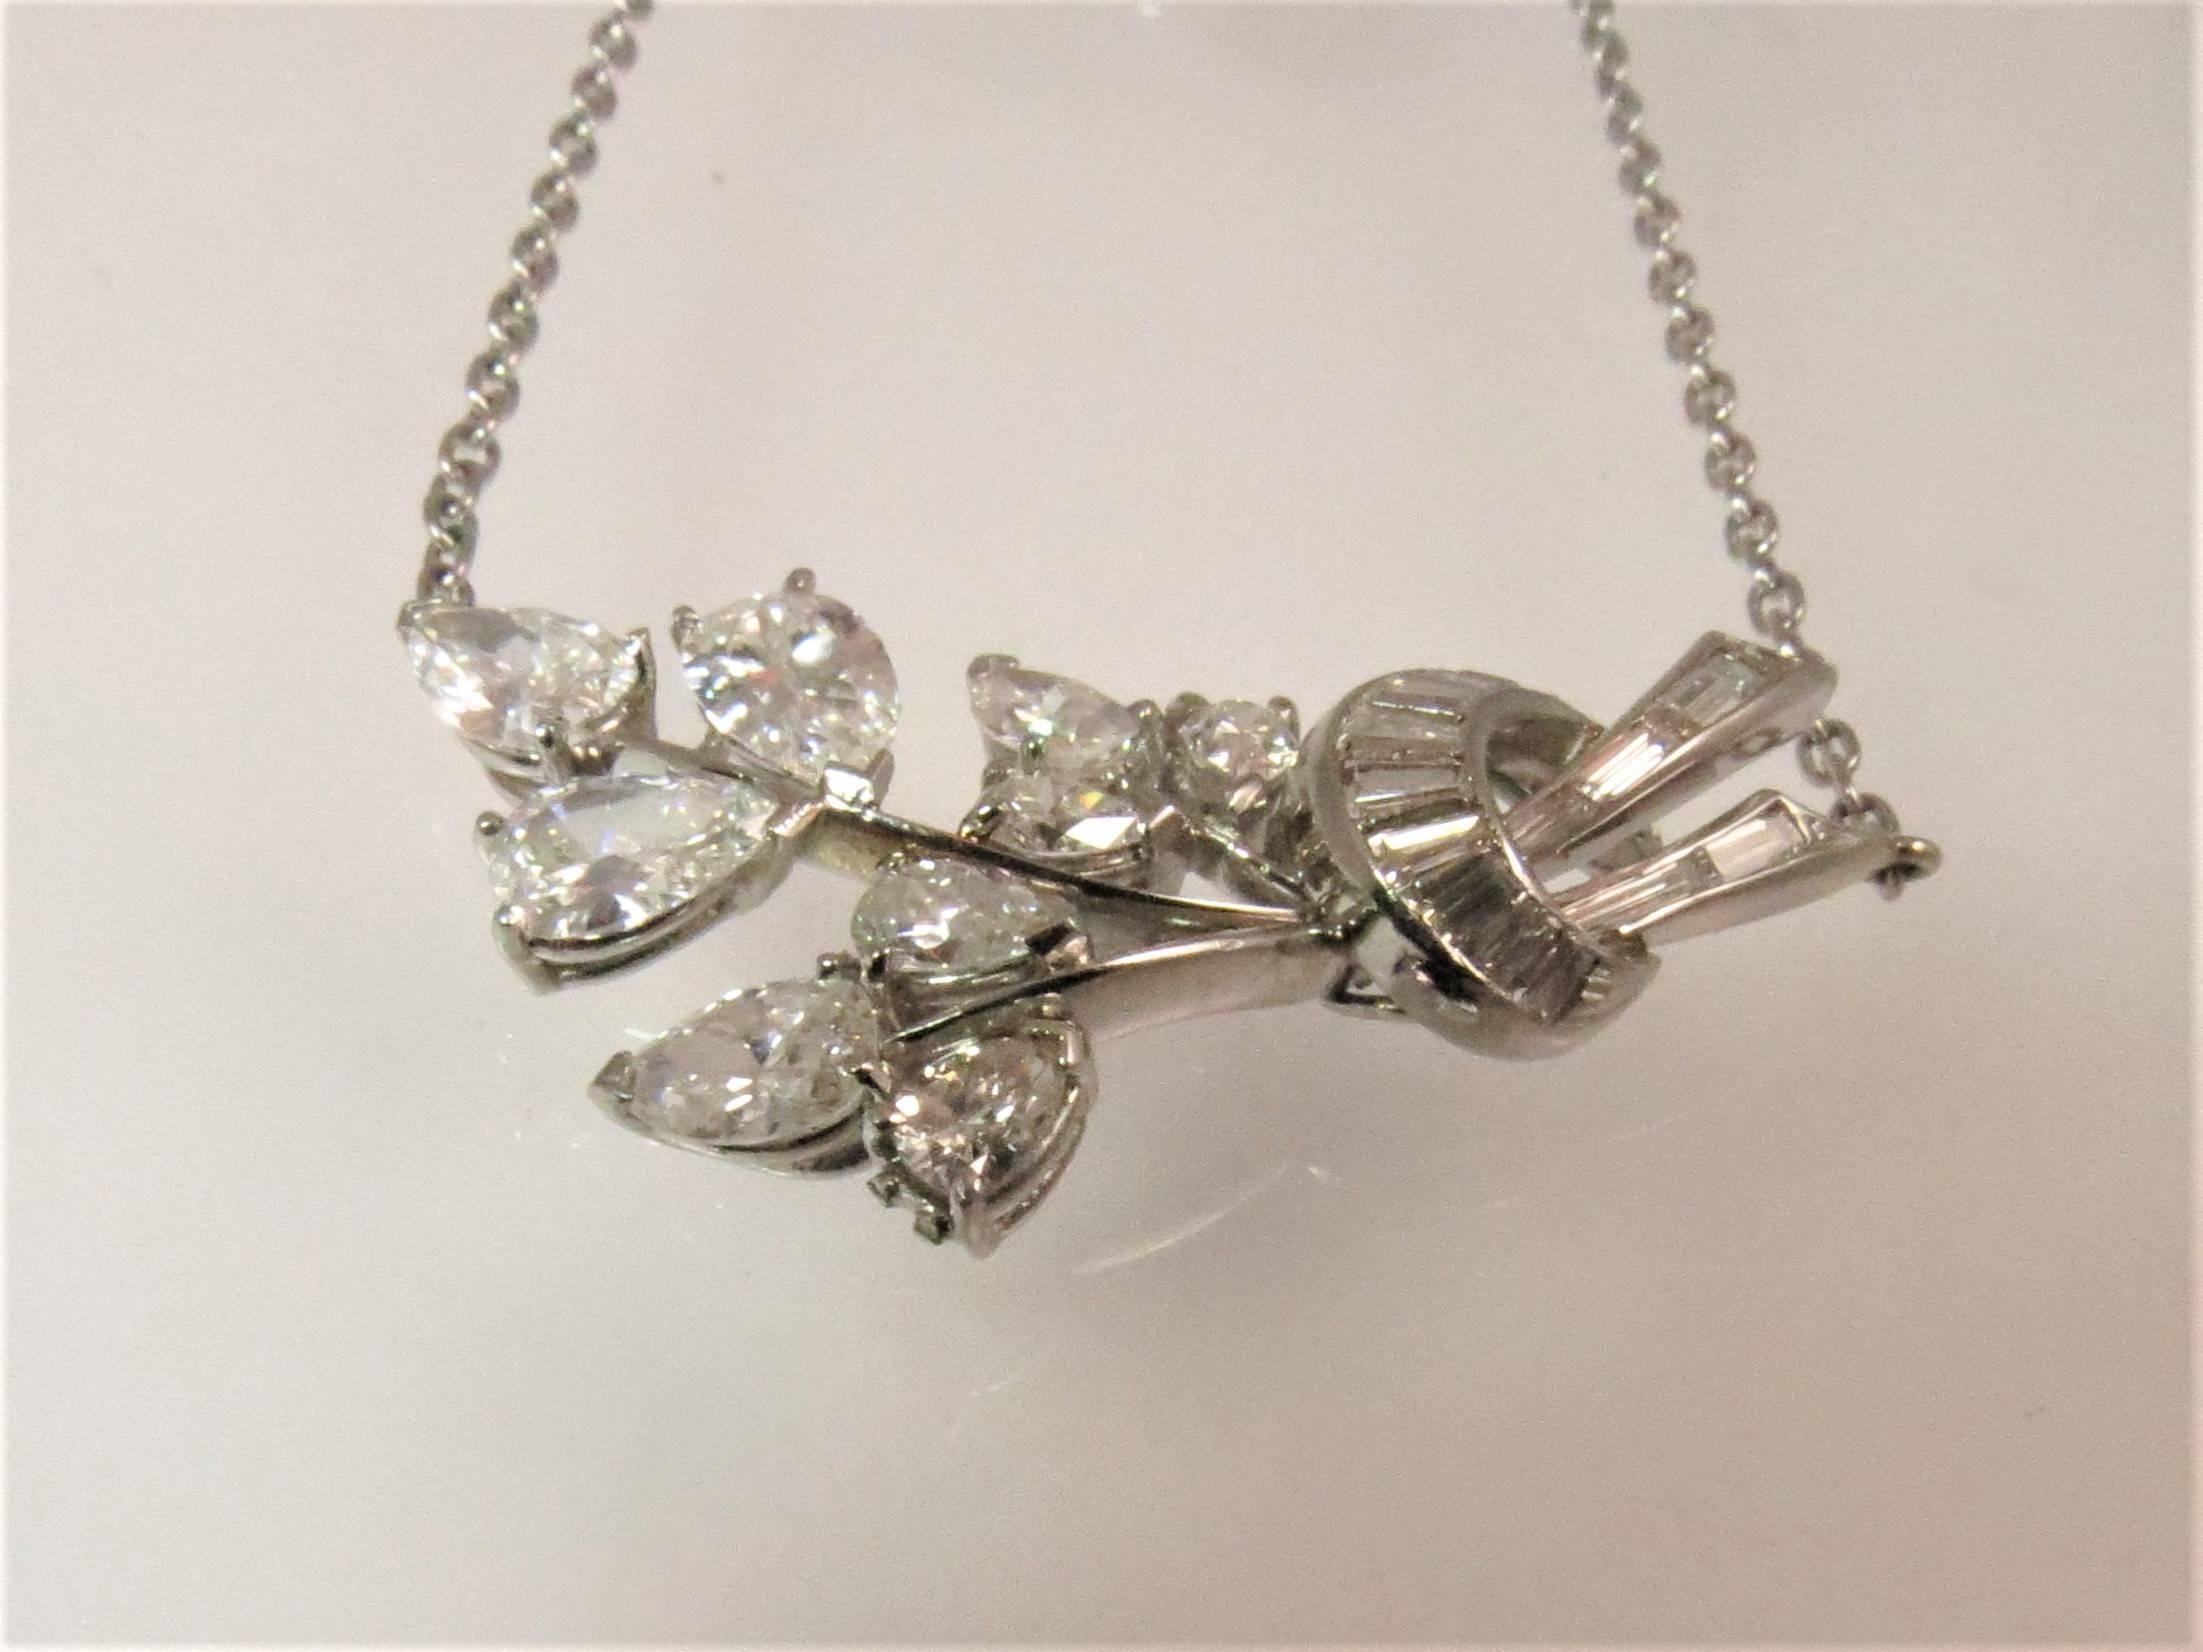 Platinum necklace with floral design consisting of 9 pear shape diamonds weighing 2.25cts and 15 baguette diamonds weighing .60cts, G-H color, VS clarity 